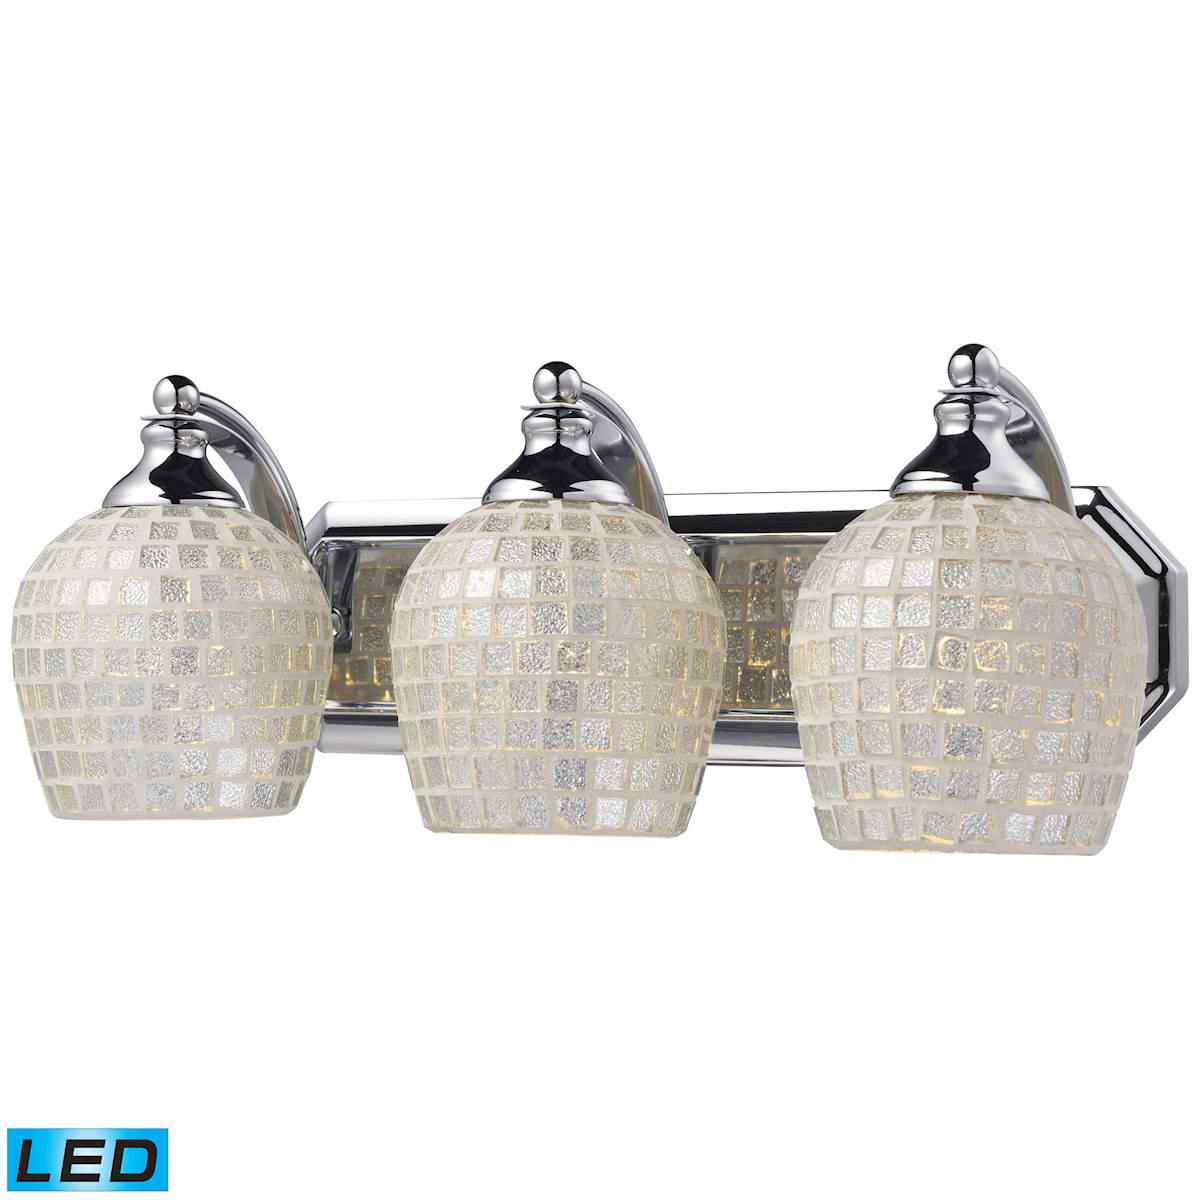 3 Light Vanity in Polished Chrome and Silver Mosaic Glass - LED, 800 Lumens (2400 Lumens Total) With Full Scale